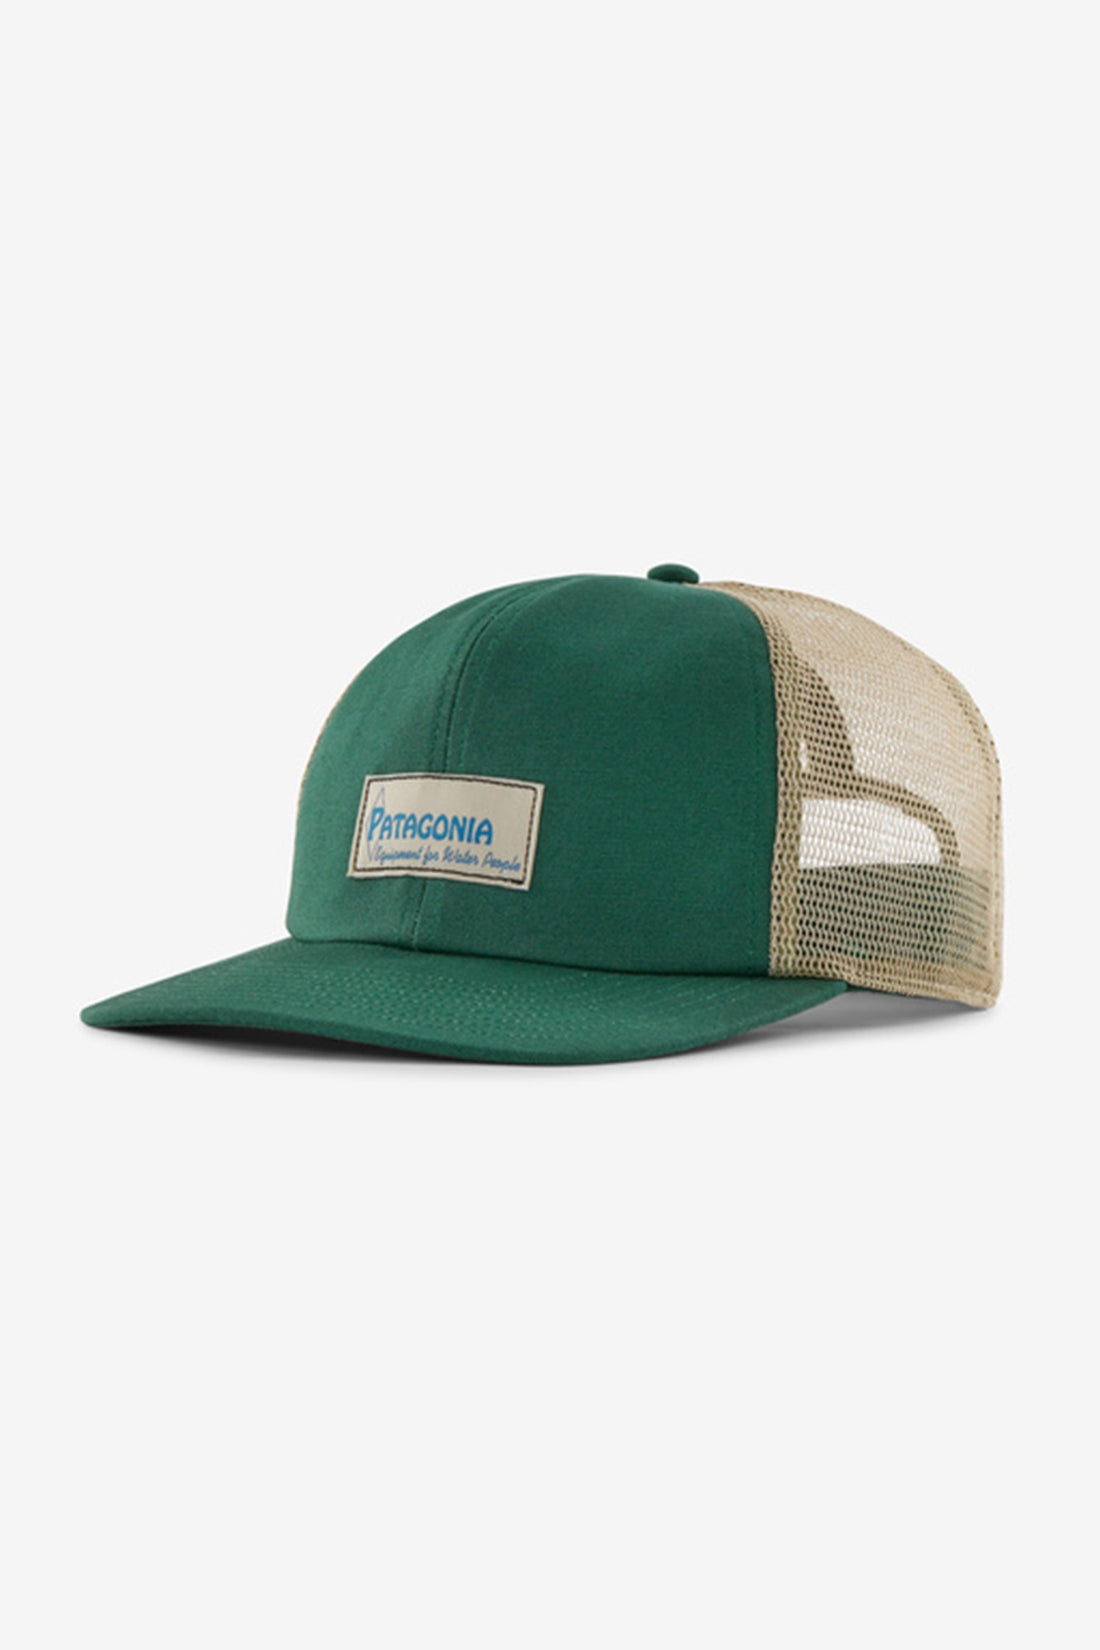 PATAGONIA RELAXED TRUCKER HAT - WATER PEOPLE LABEL: CONIFER GREEN HAT PATAGONIA   